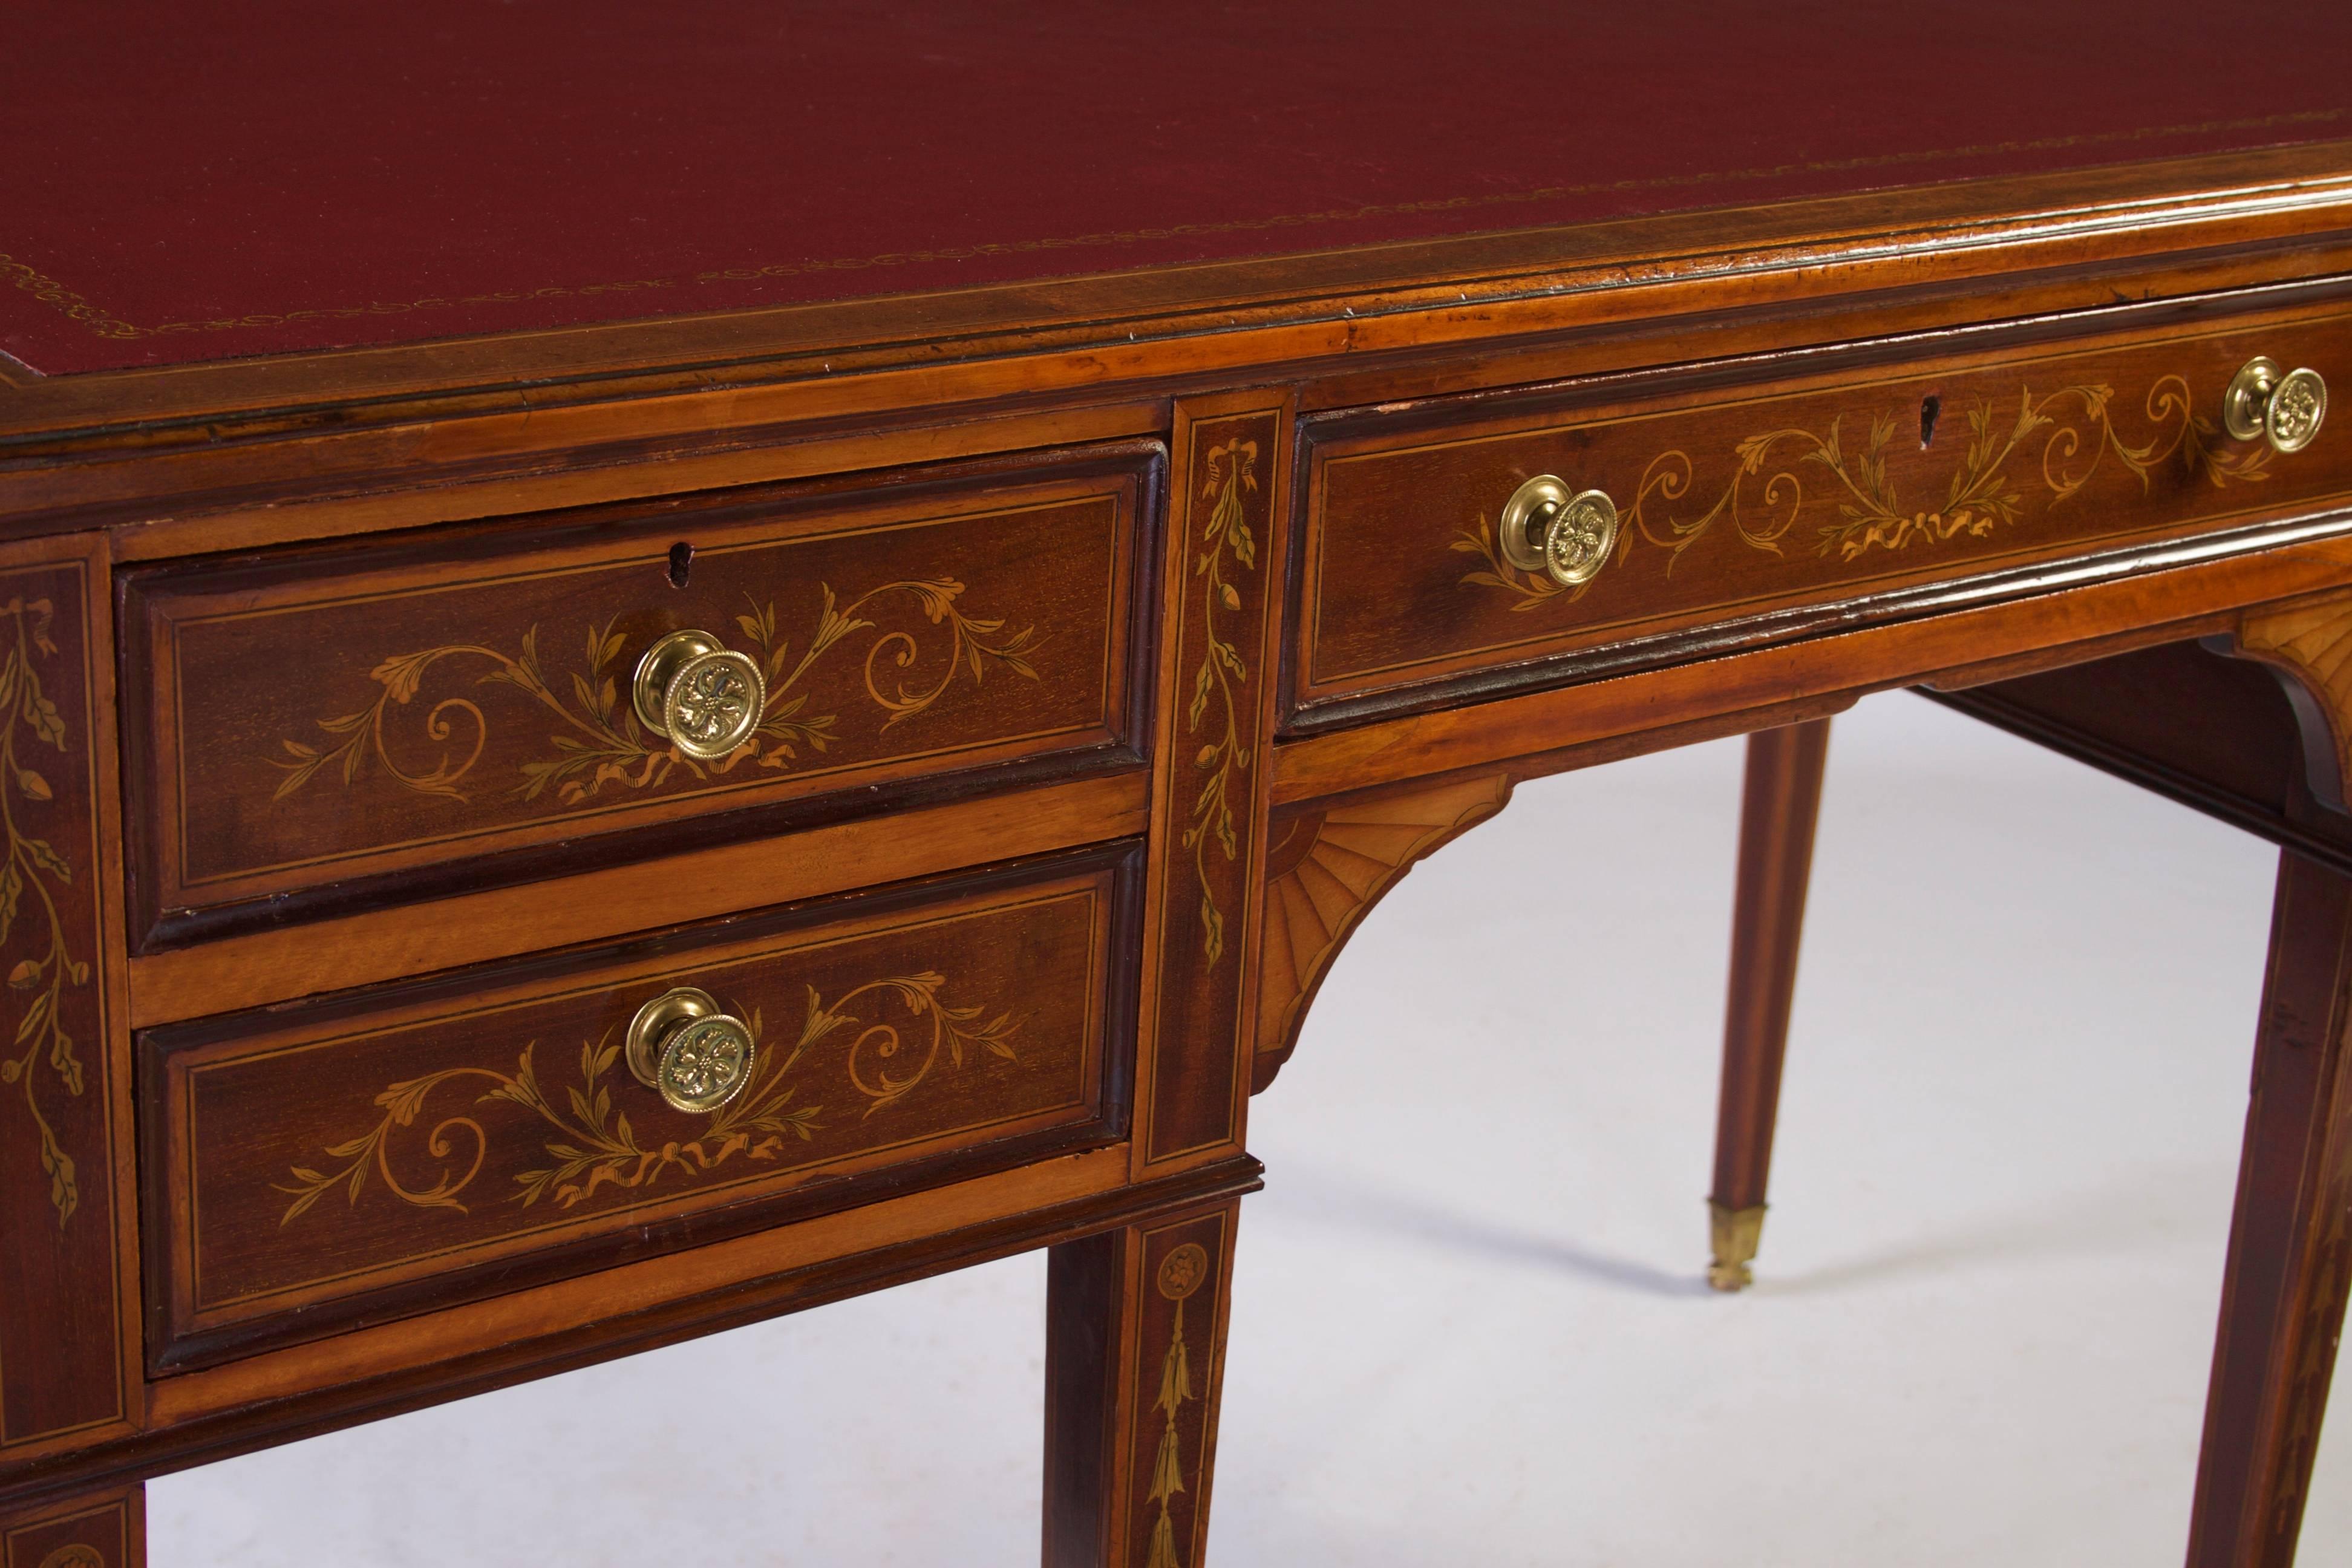 Having an inset red leather top with gilt tooling, above a central drawer stamped Edwards & Roberts, flanked by two shorter drawers each decorated with inlaid bell flowers, standing on six square tapered legs with further bell flower inlay